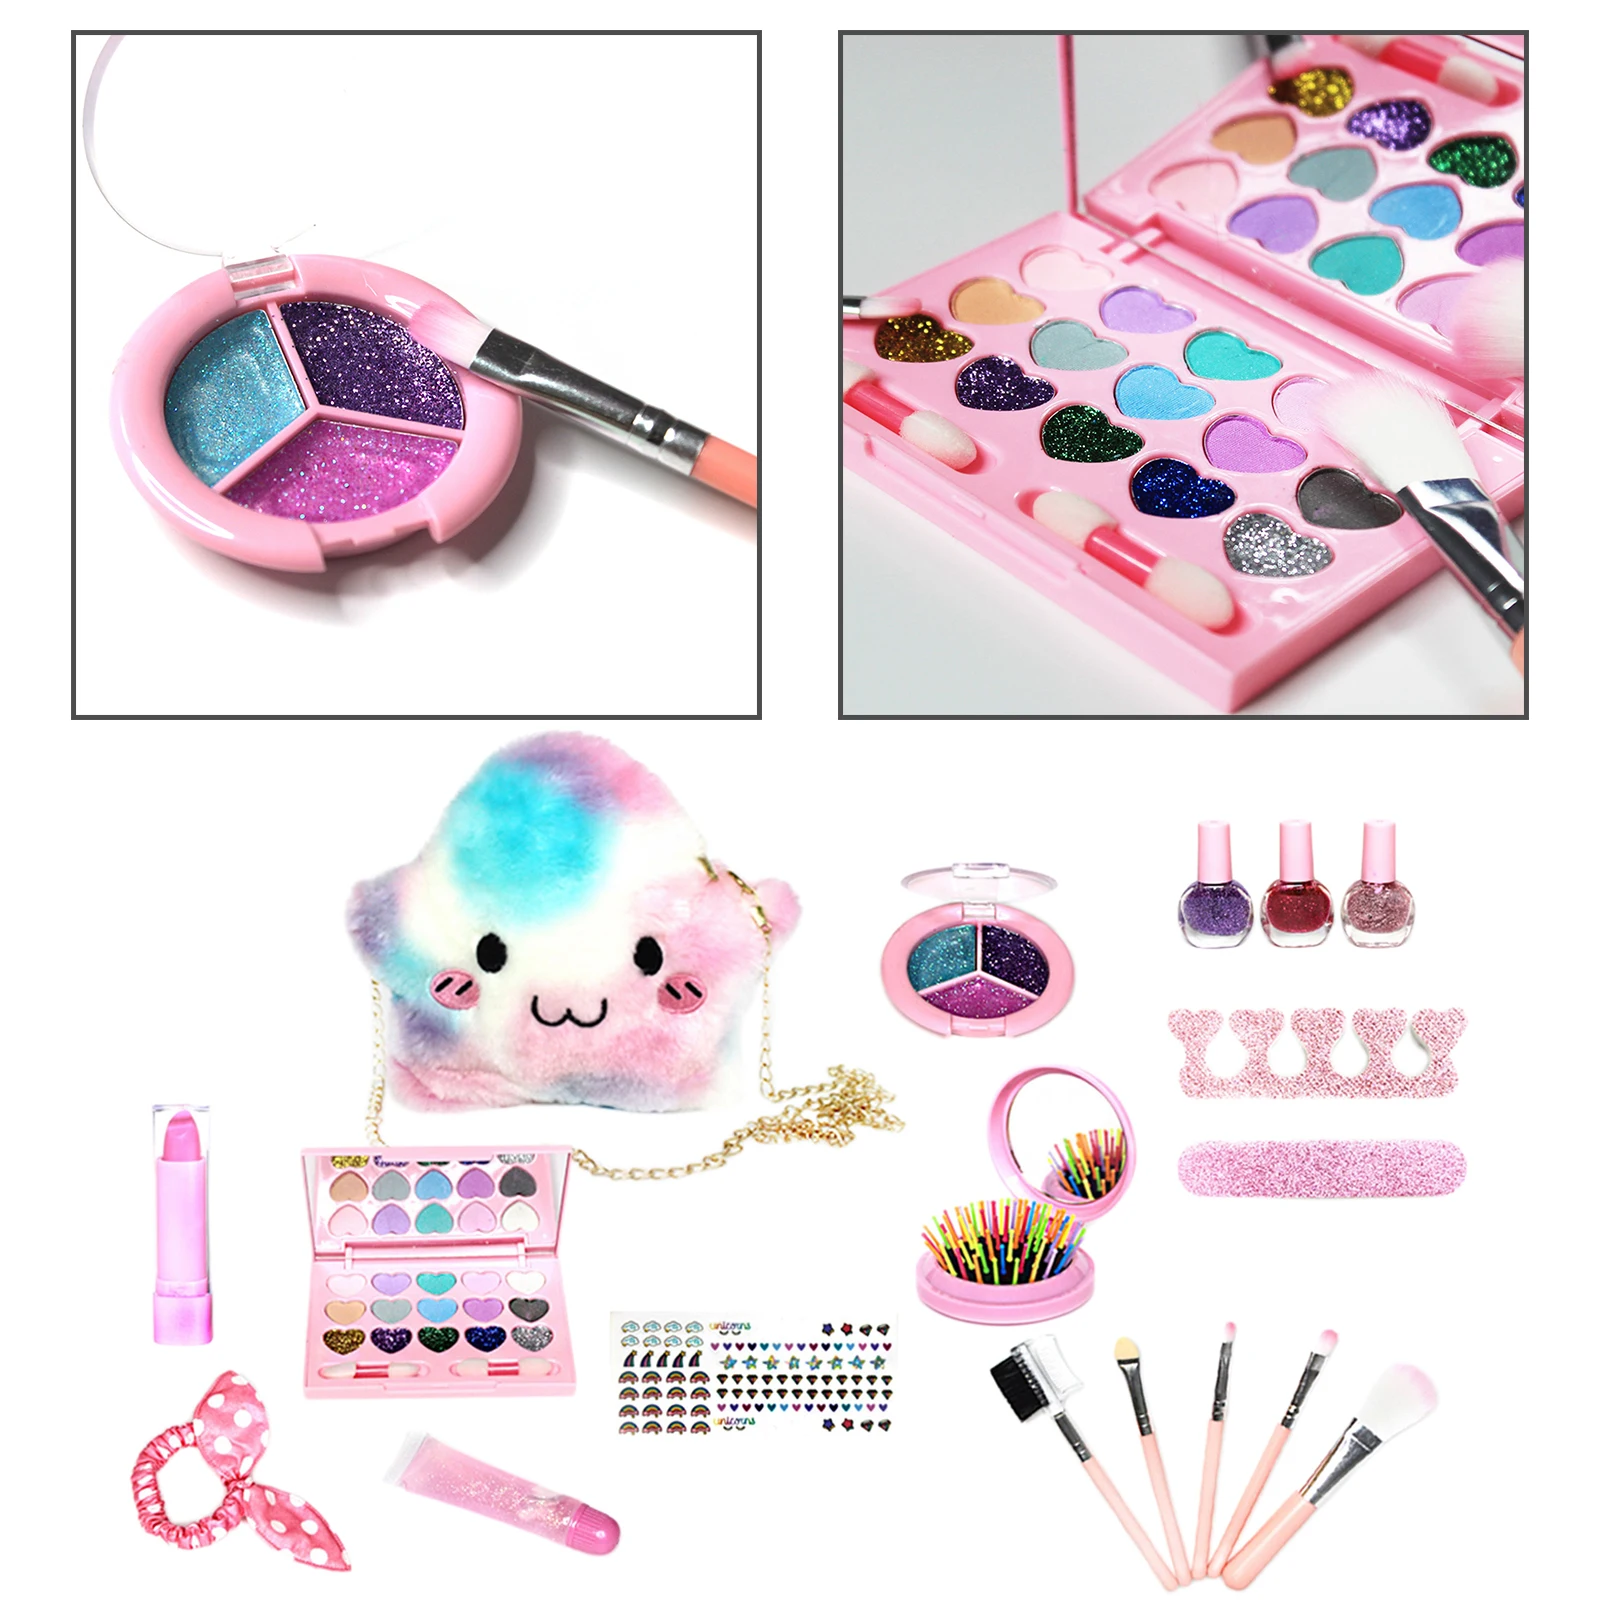 Children Pretend Play Makeup Case Beauty Make-up Kits Set Tools Cosmetic Toy Pretend Play Princess Little Girls Kids Gift